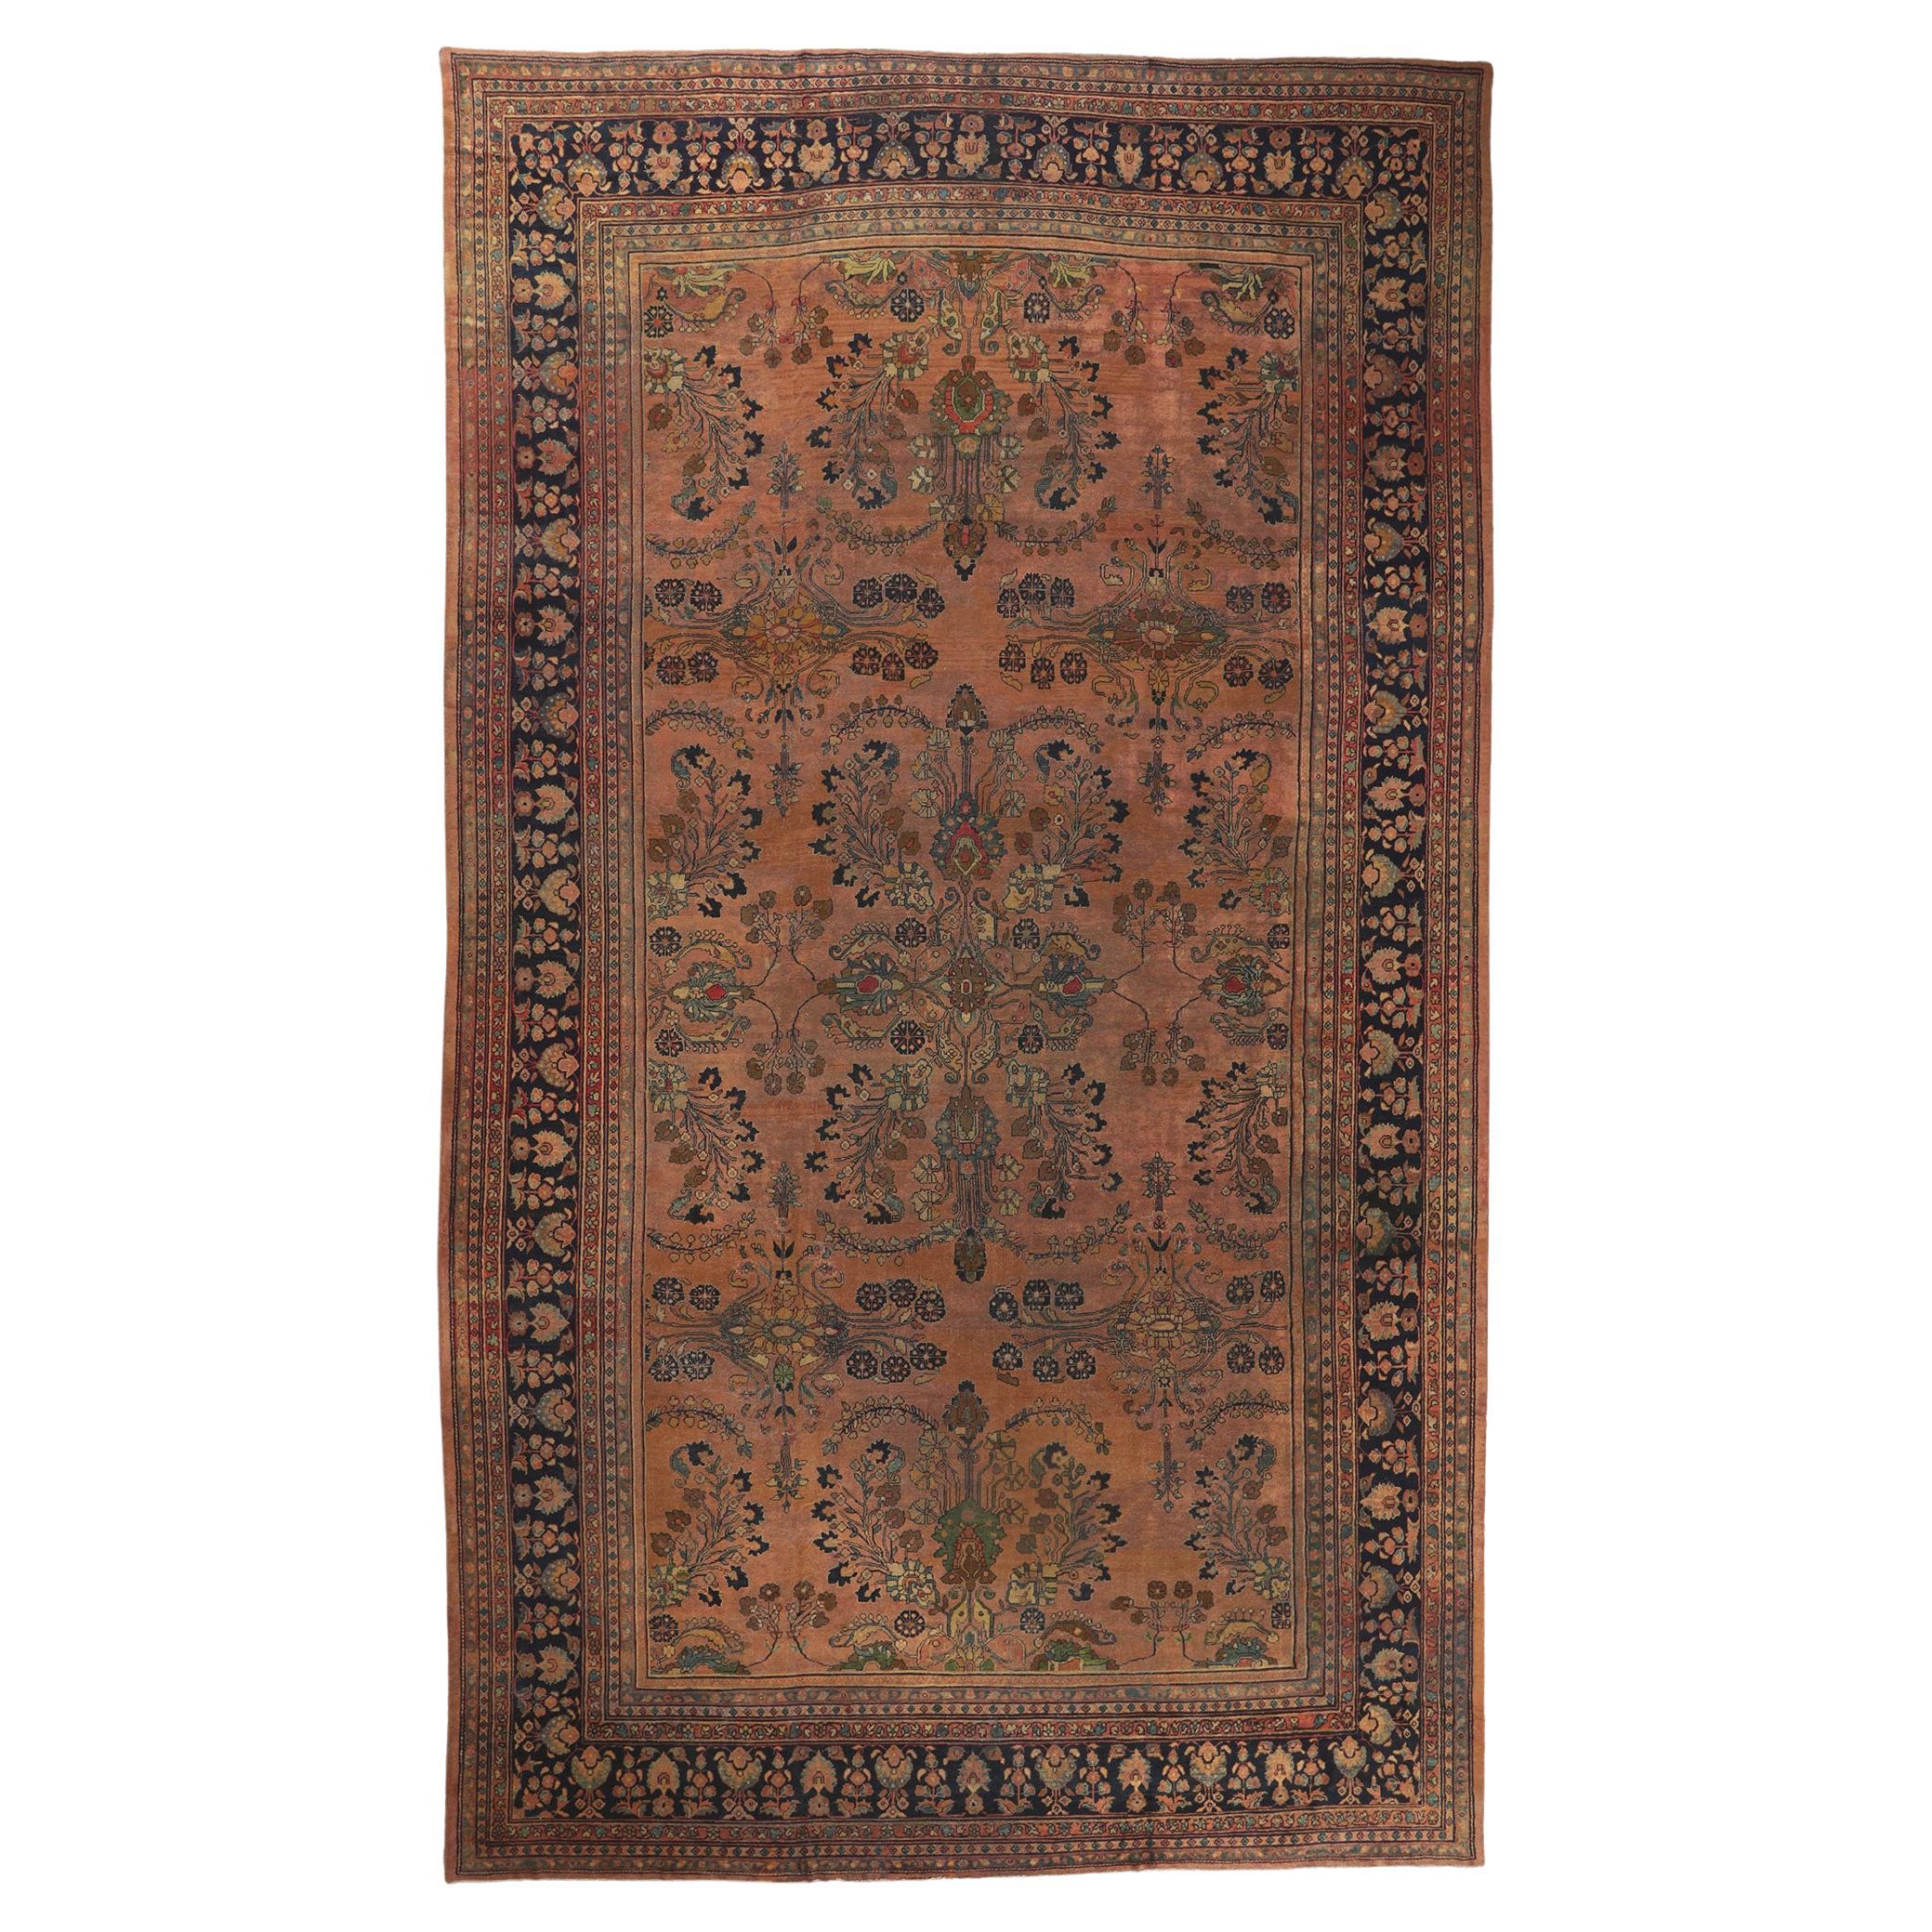 Oversized Antique Persian Mahal Rug, Hotel Lobby Size Carpet